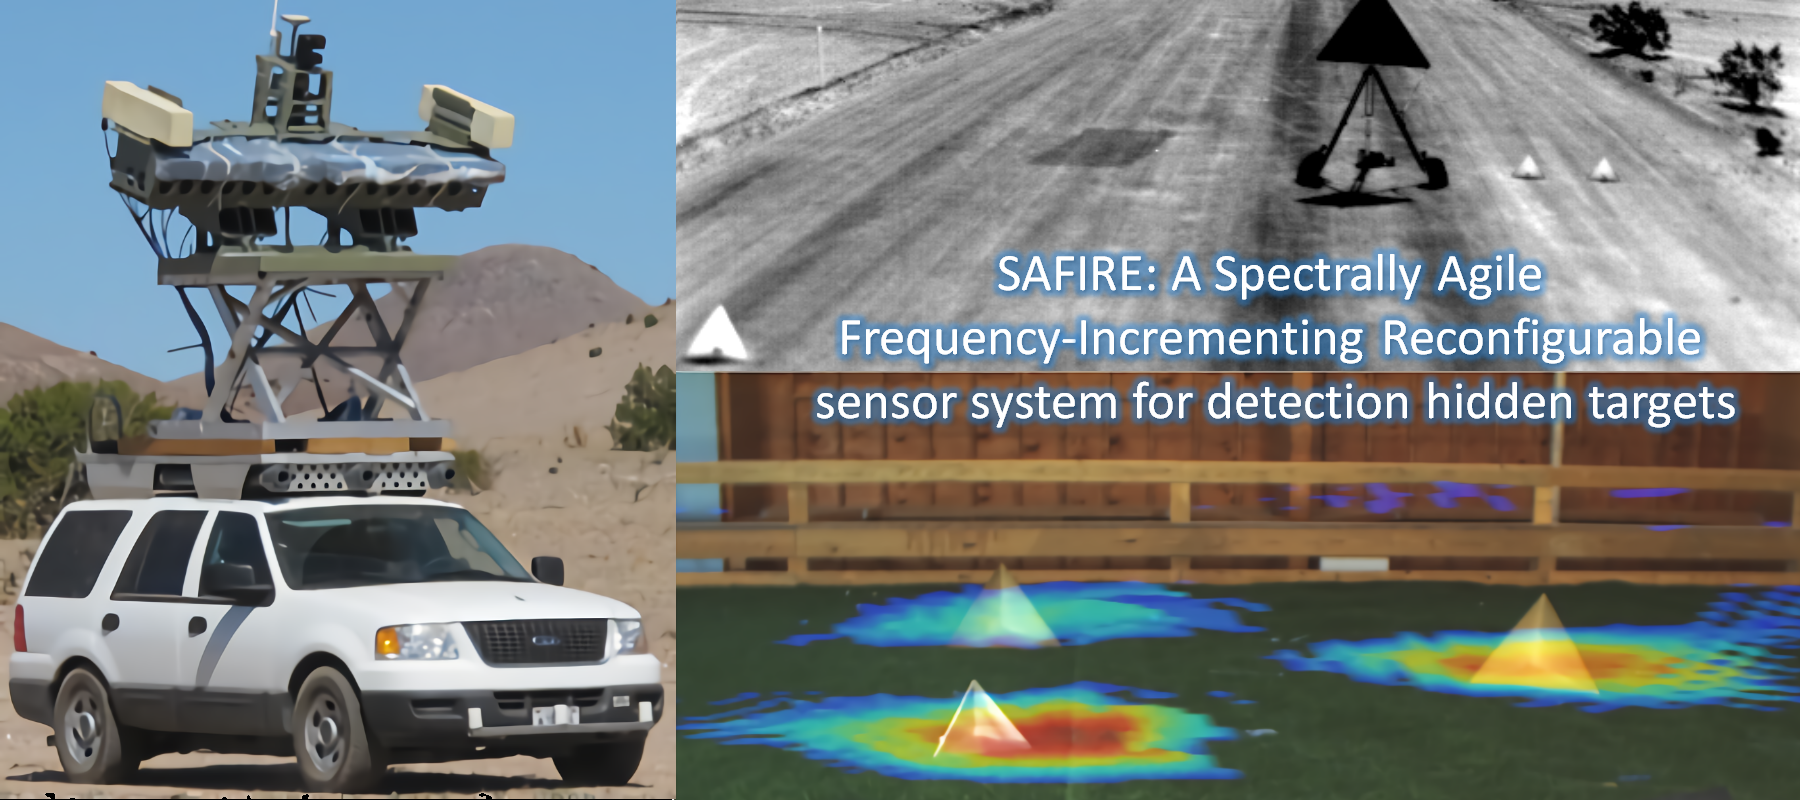 SAFIRE: A Spectrally Agile Frequency-Incrementing REconfigurable sensor system for detecting hidden targets